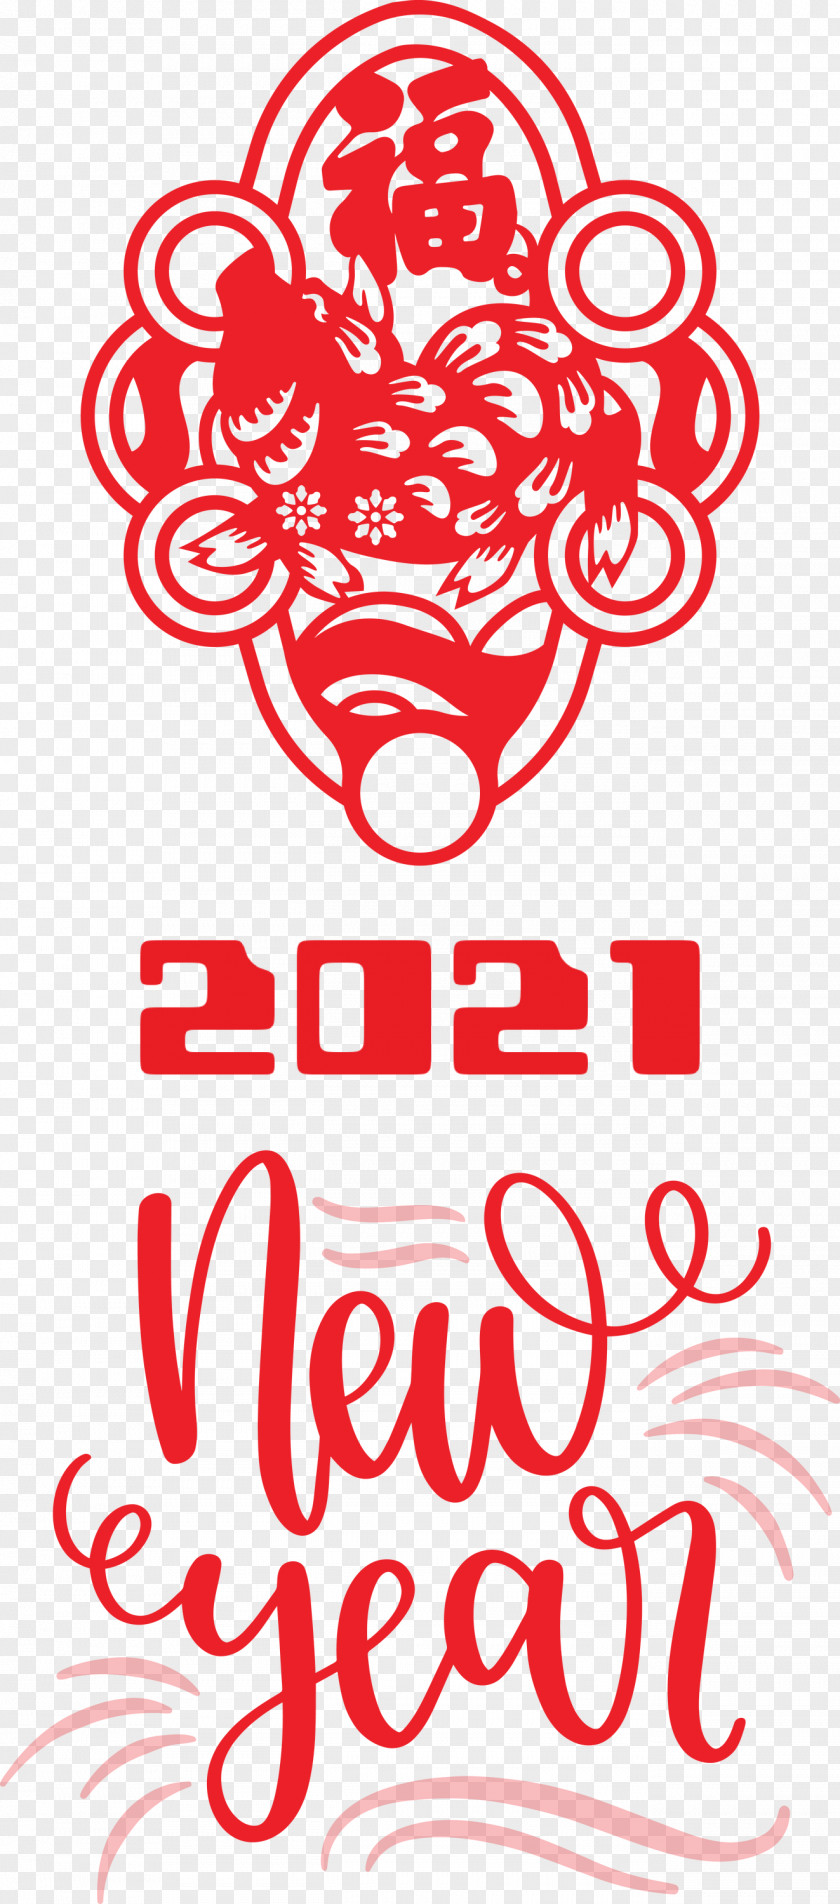 Happy Chinese New Year 2021 PNG